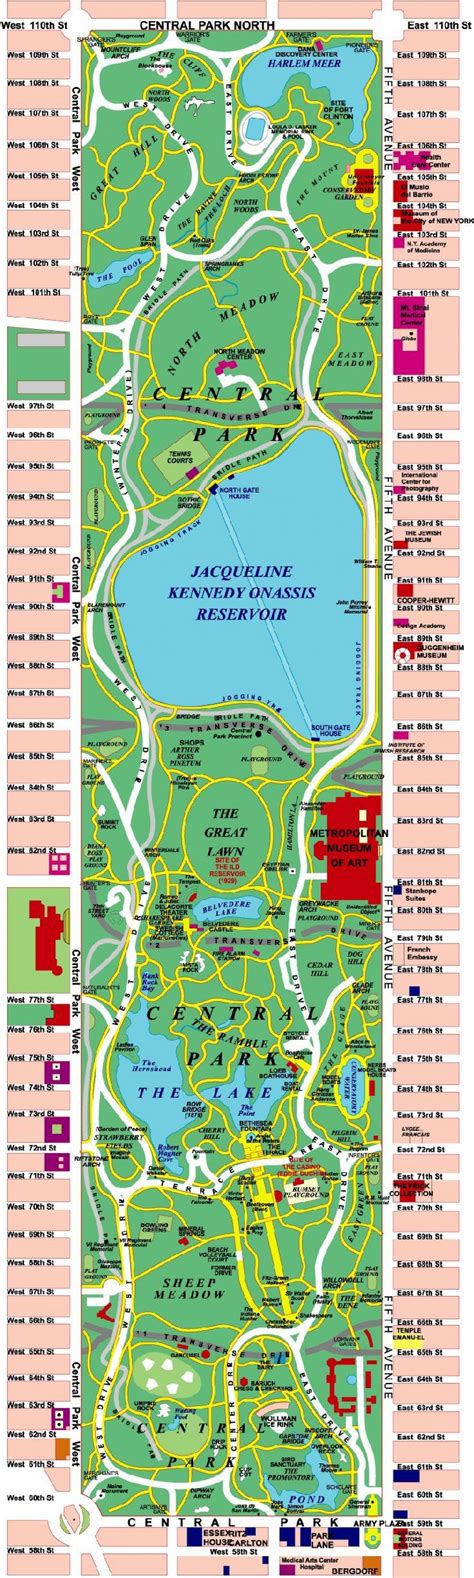 Map of New York Central Park